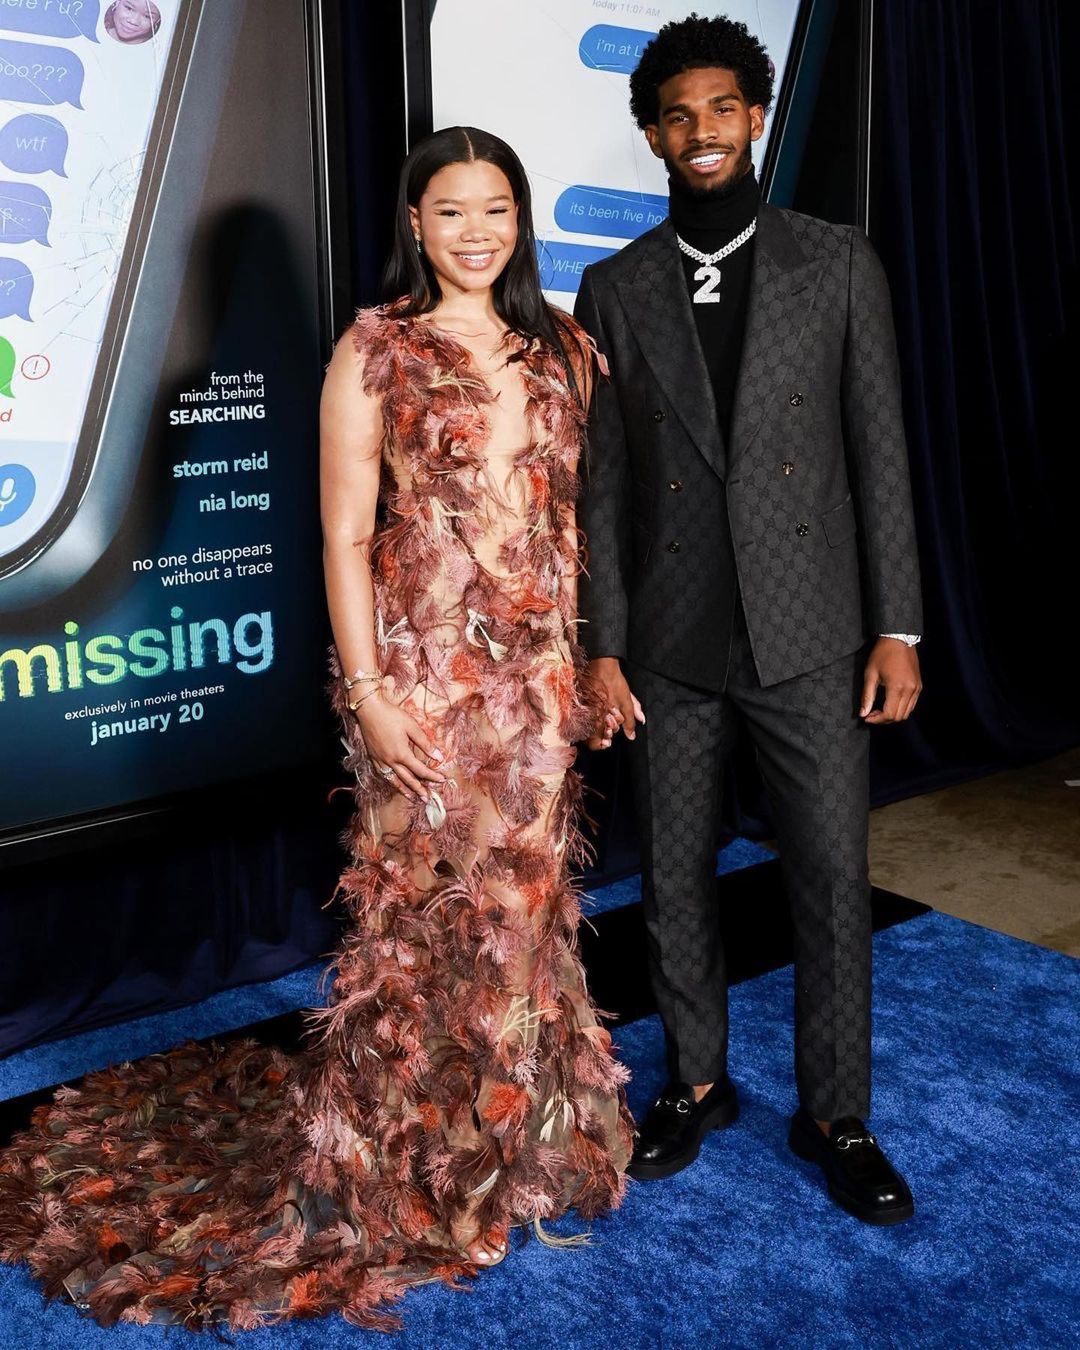 Fashion Bomb Couple Storm Reid and Shedeur Sanders Attended the Premiere Missing Wearing Balmain and Gucci